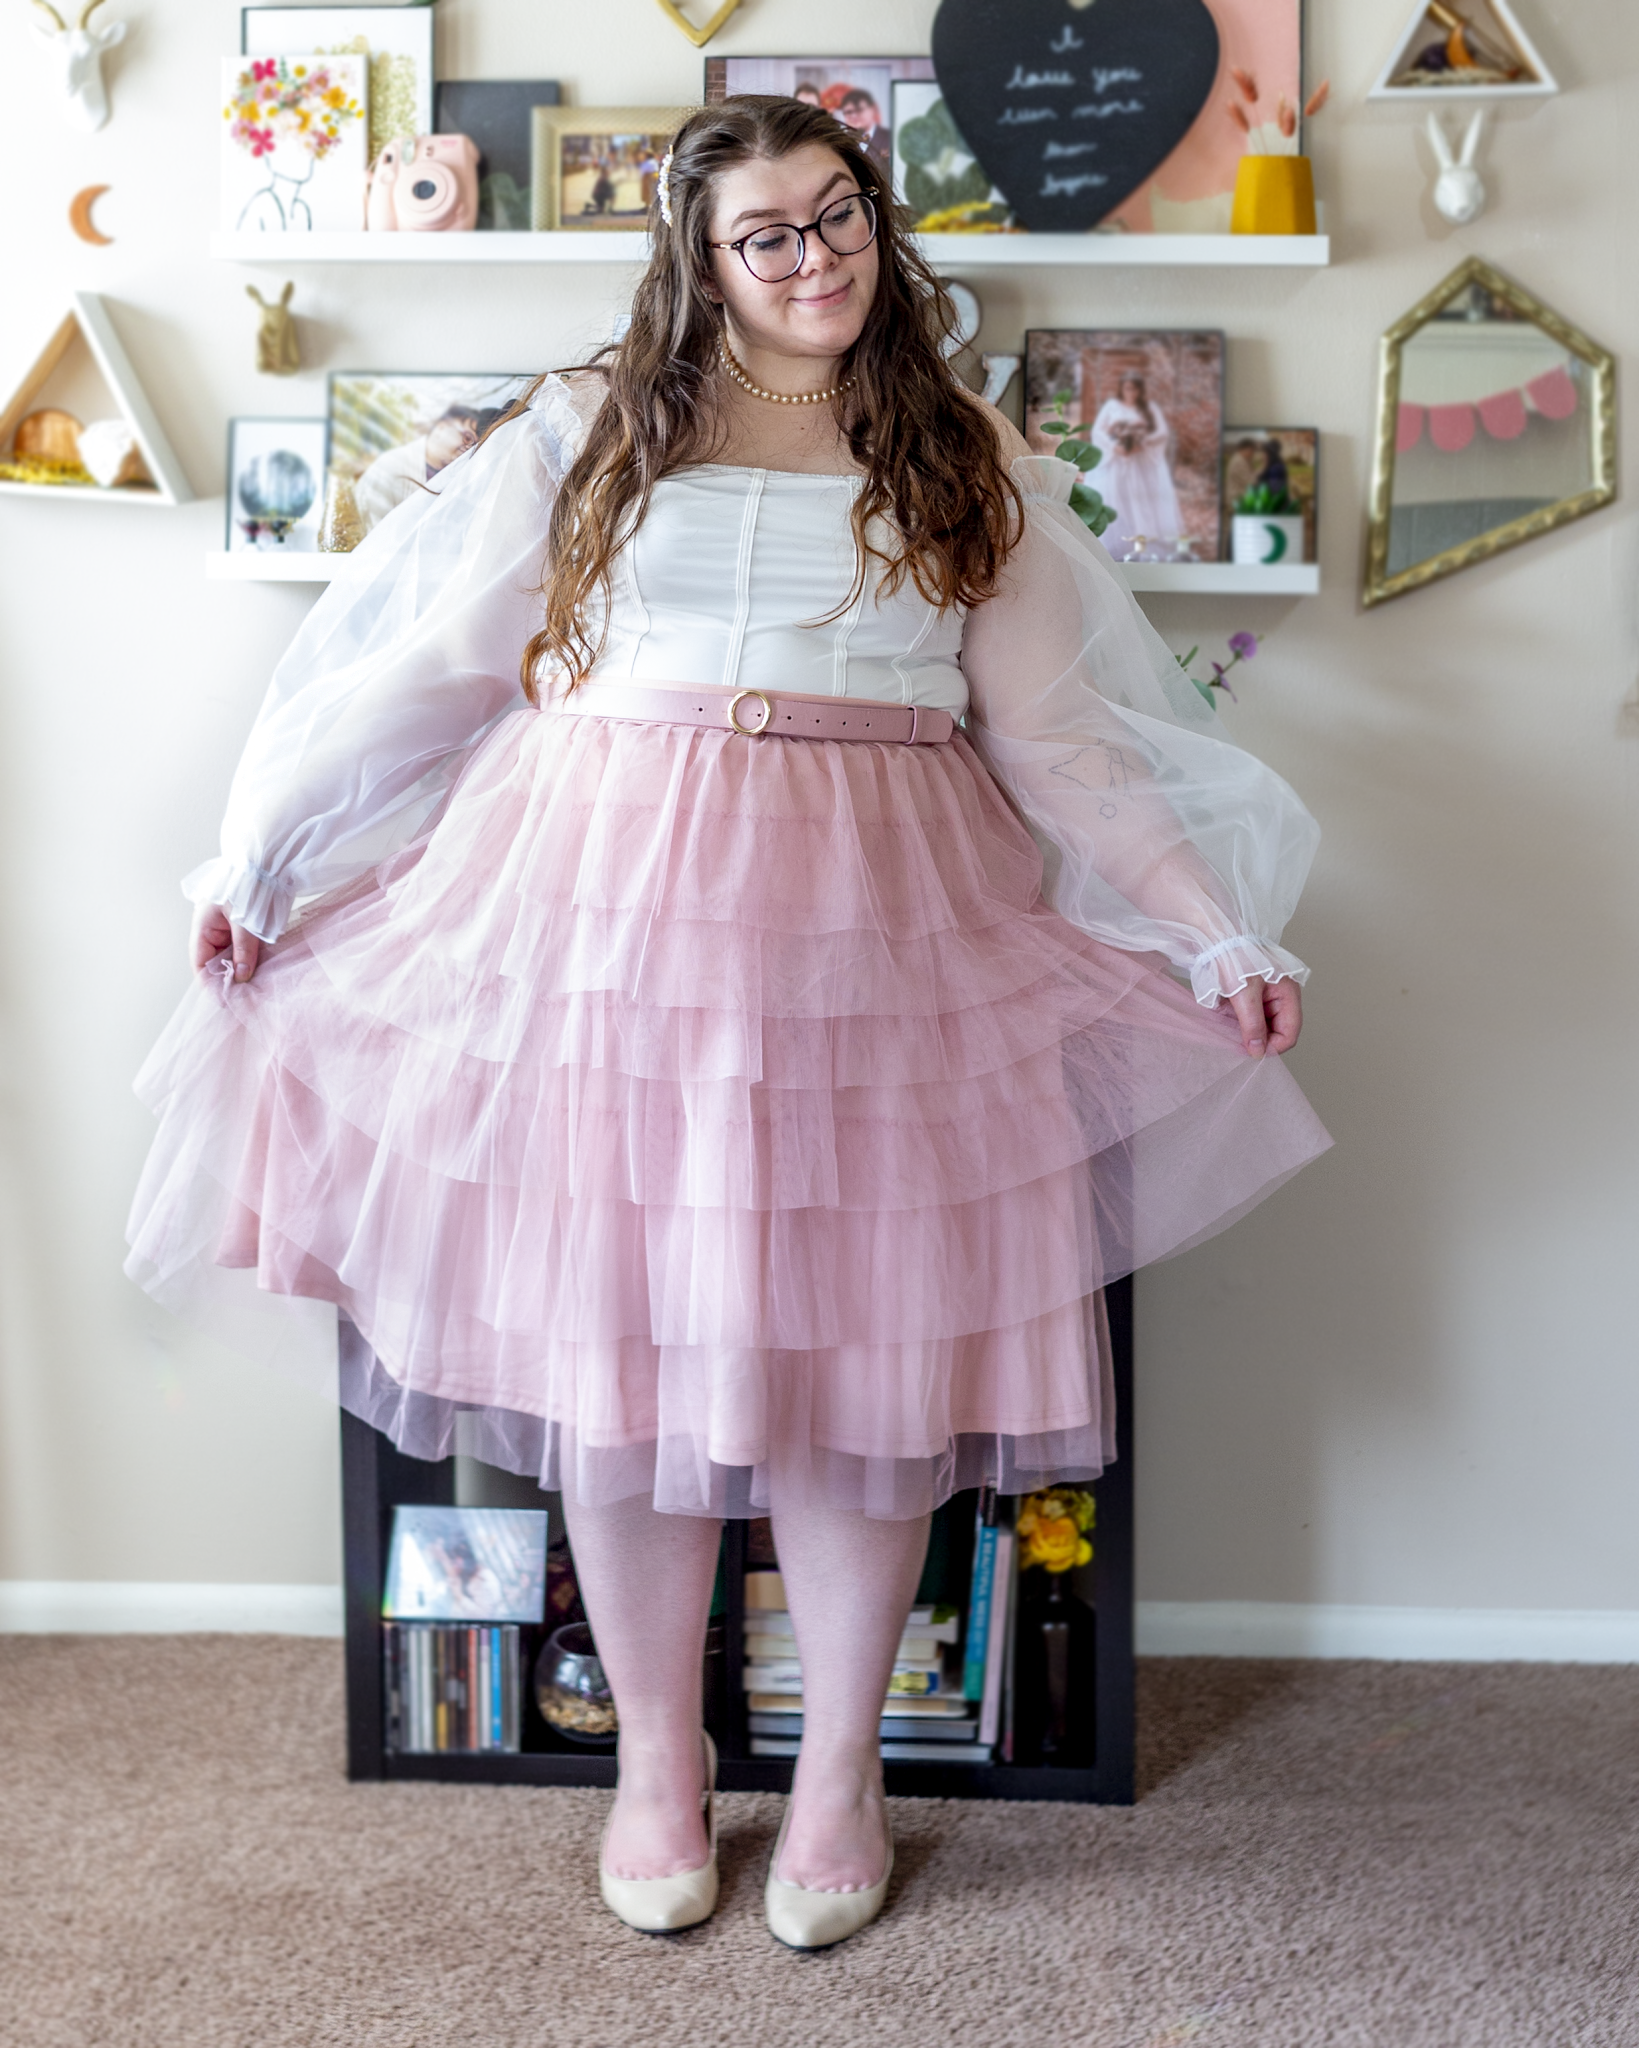 An outfit consisting of a white corset inspired bodysuit with off the shoulder long sheer lantern puffy sleeves with a pastel pink tiered tulle midi skirt layered over, belted with a coordinated pink belt and beige pointed toe slingback heels.